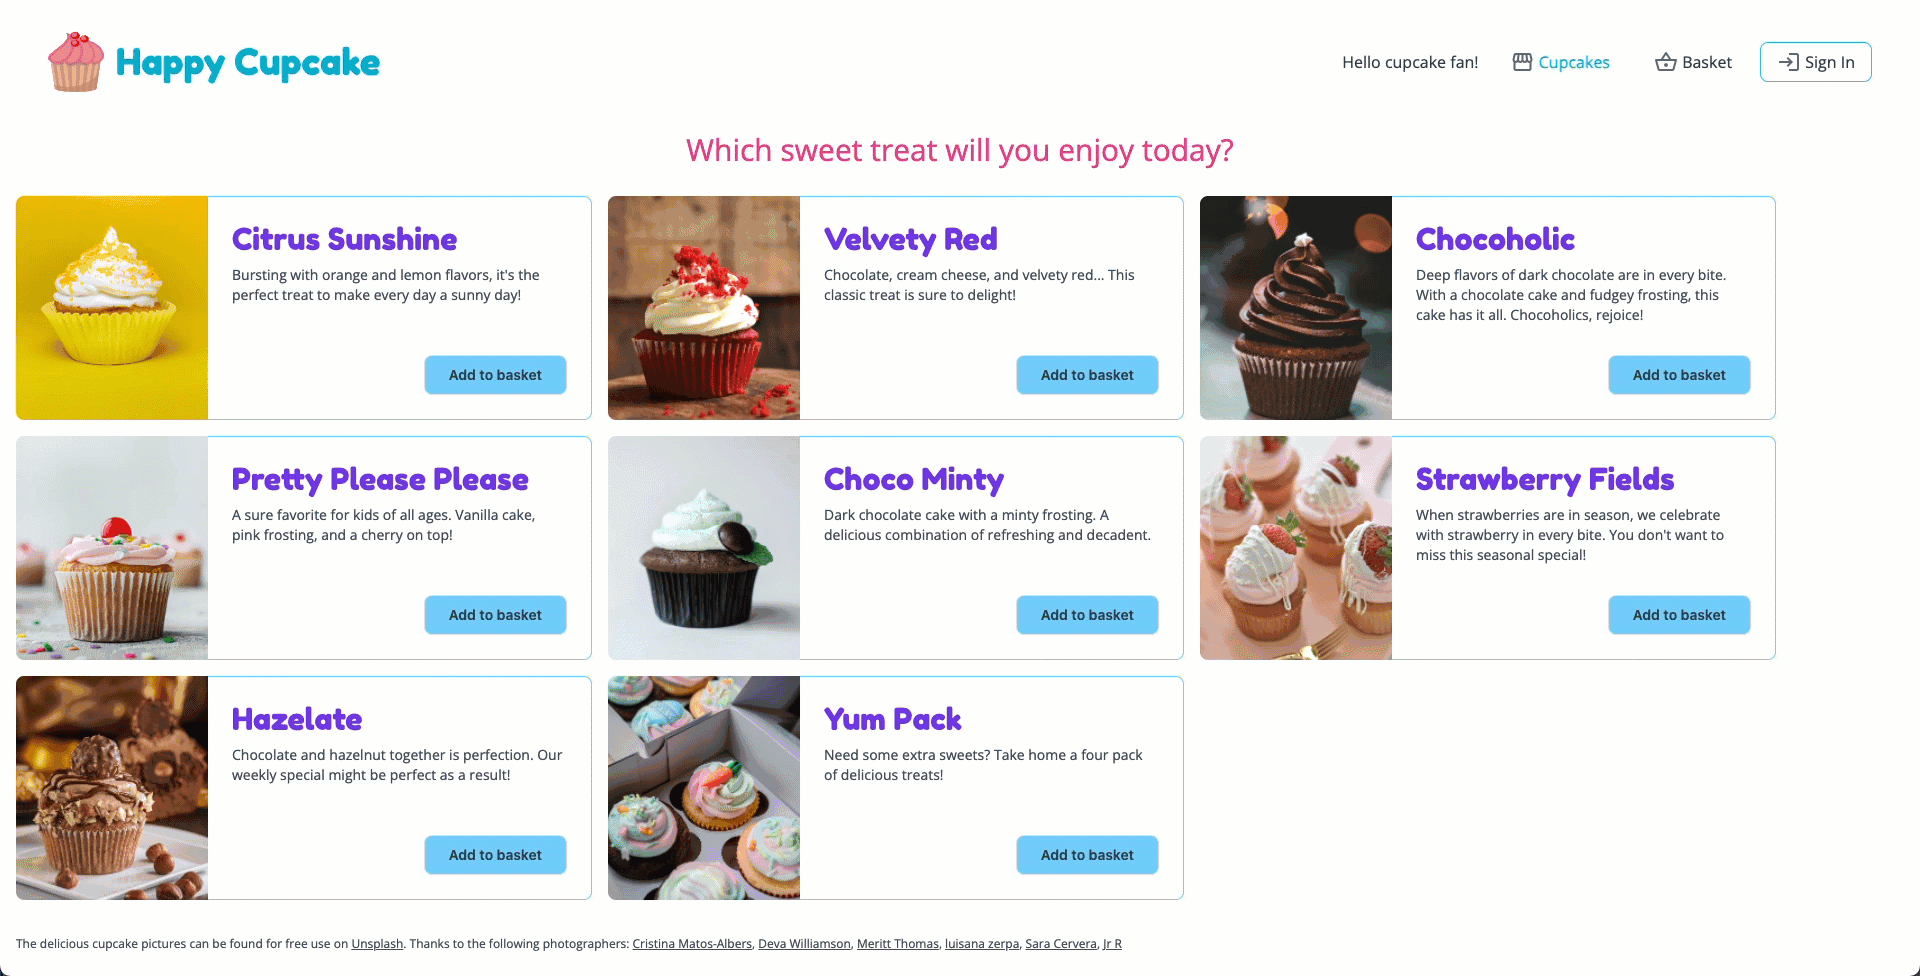 Animated gif showing the final project with micro frontends that handle the cupcake shopping basket, authentication, and profile information